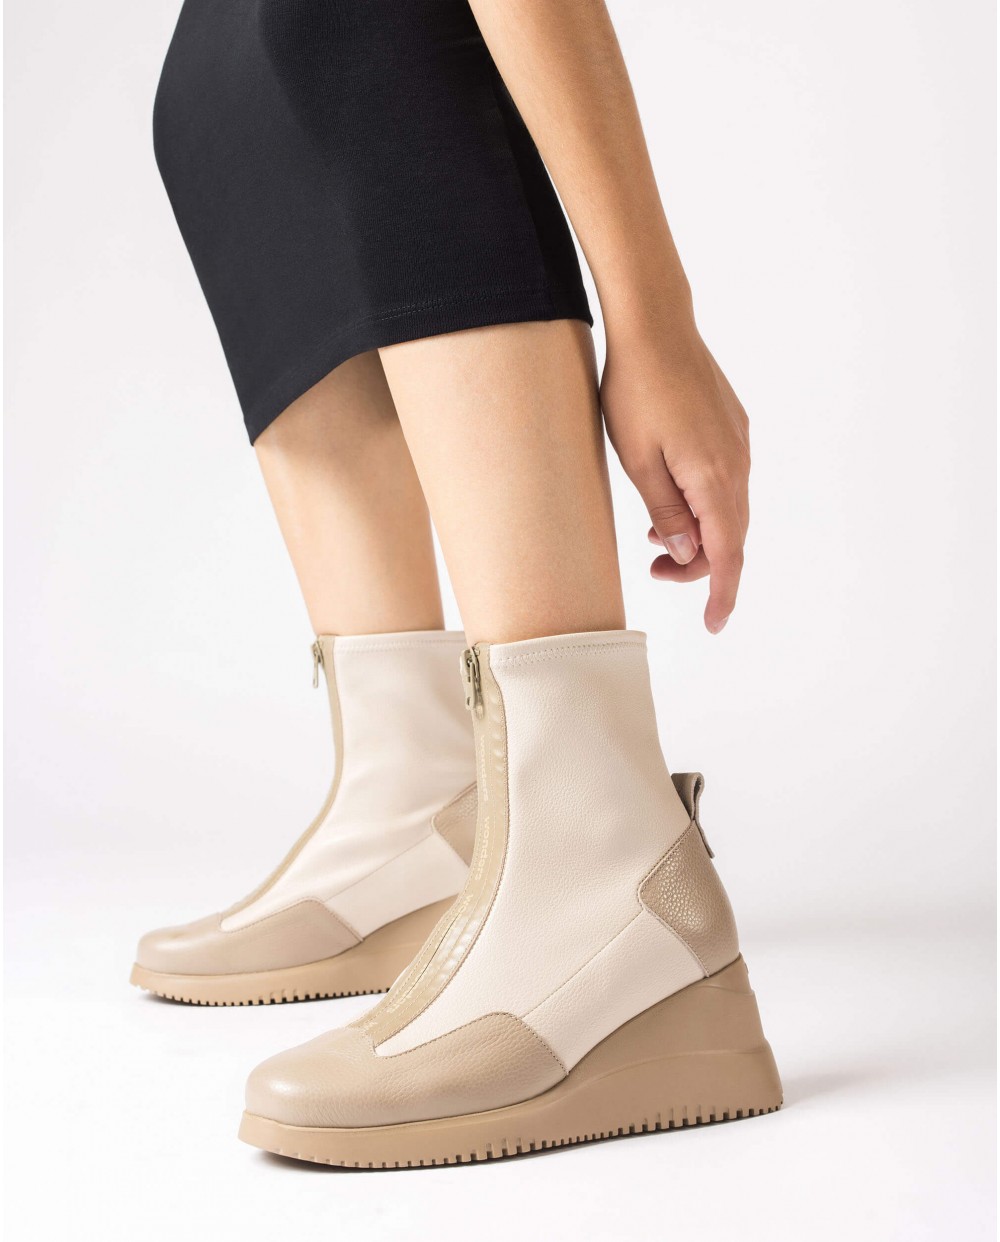 Wonders-Ankle Boots-Beige INDIA ankle boot